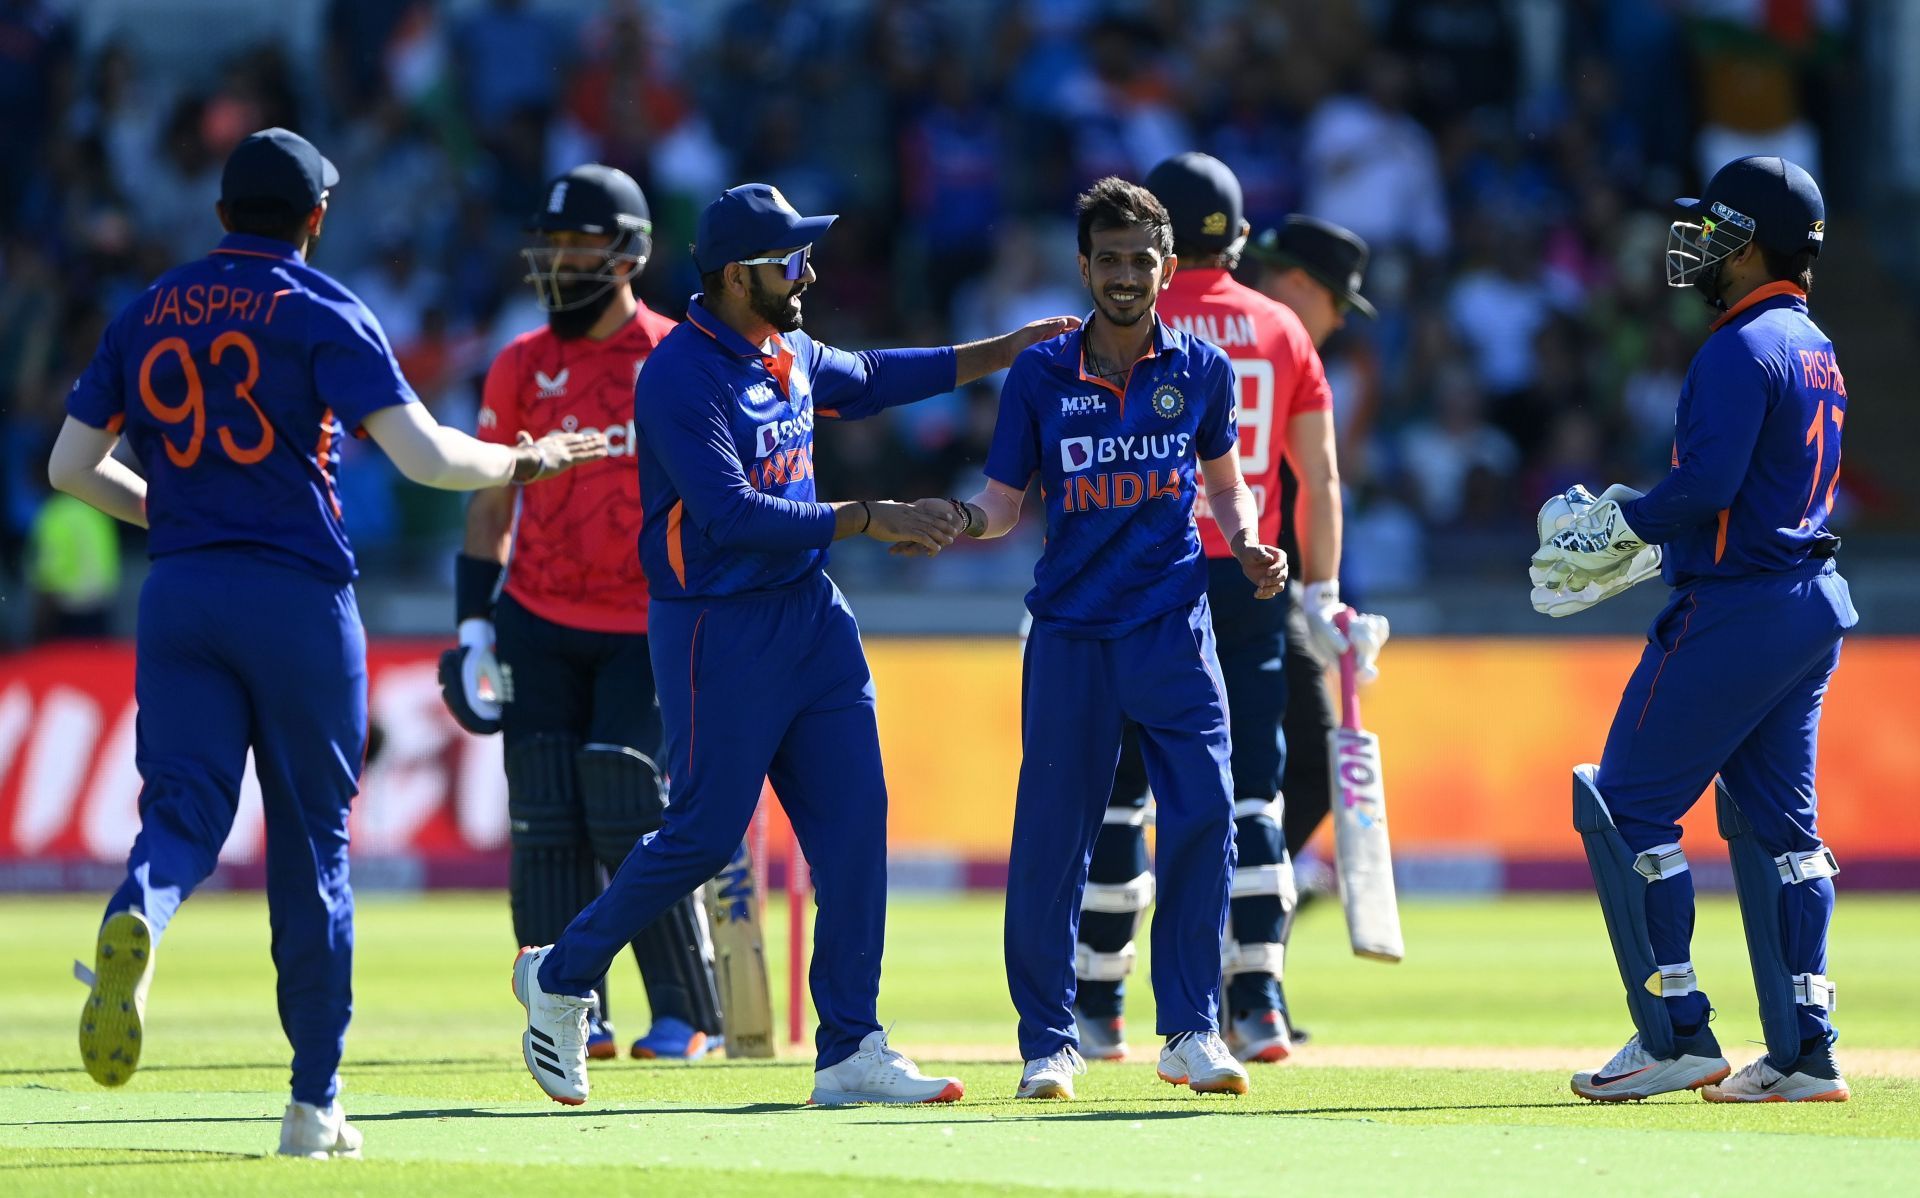 Indian players celebrate after taking the wicket of Dawid Malan. Pic: Getty Images